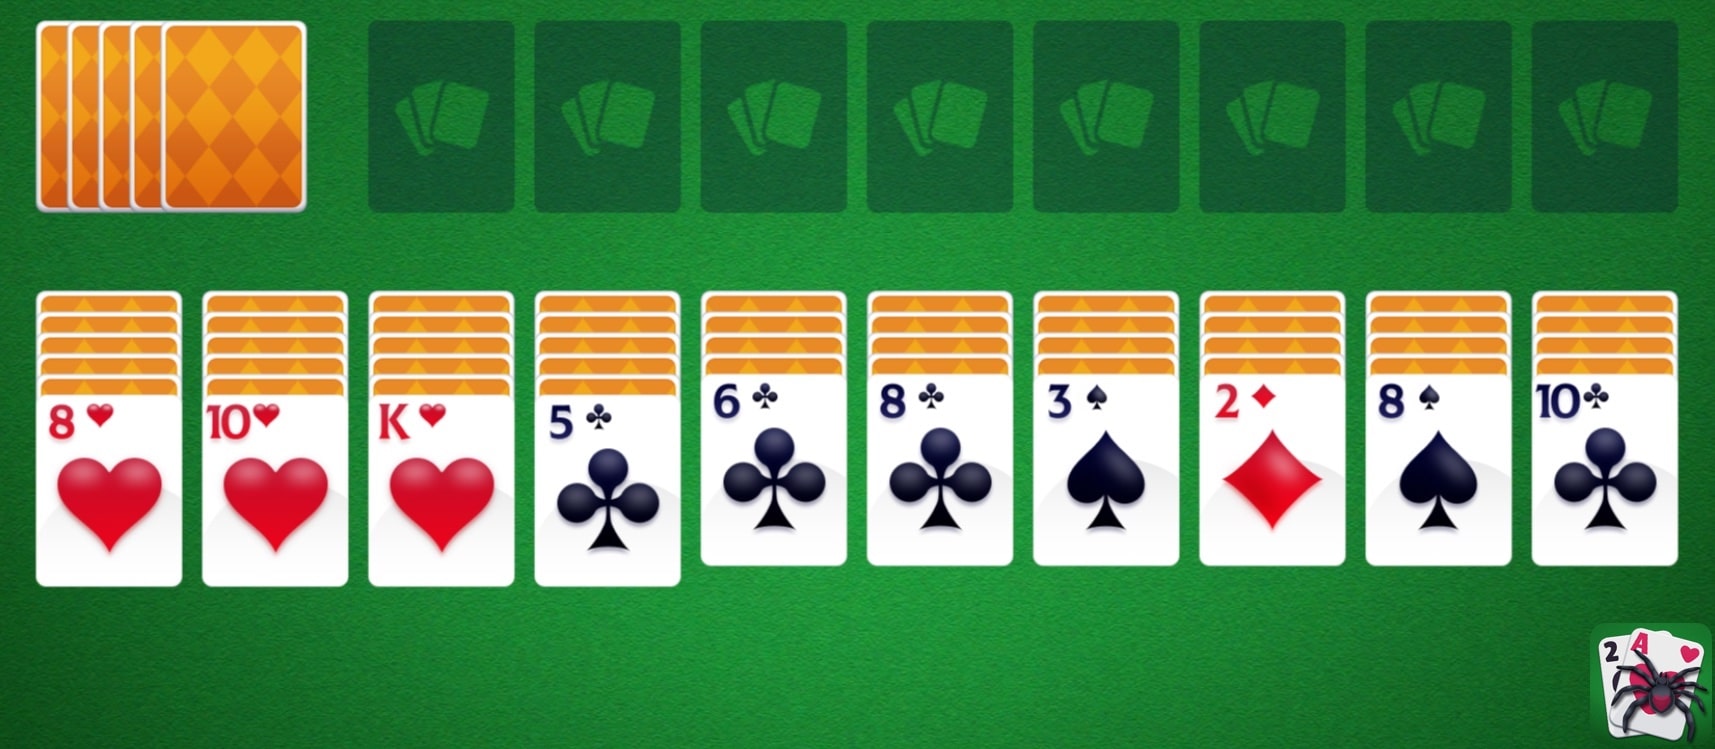 spider solitaire playing field